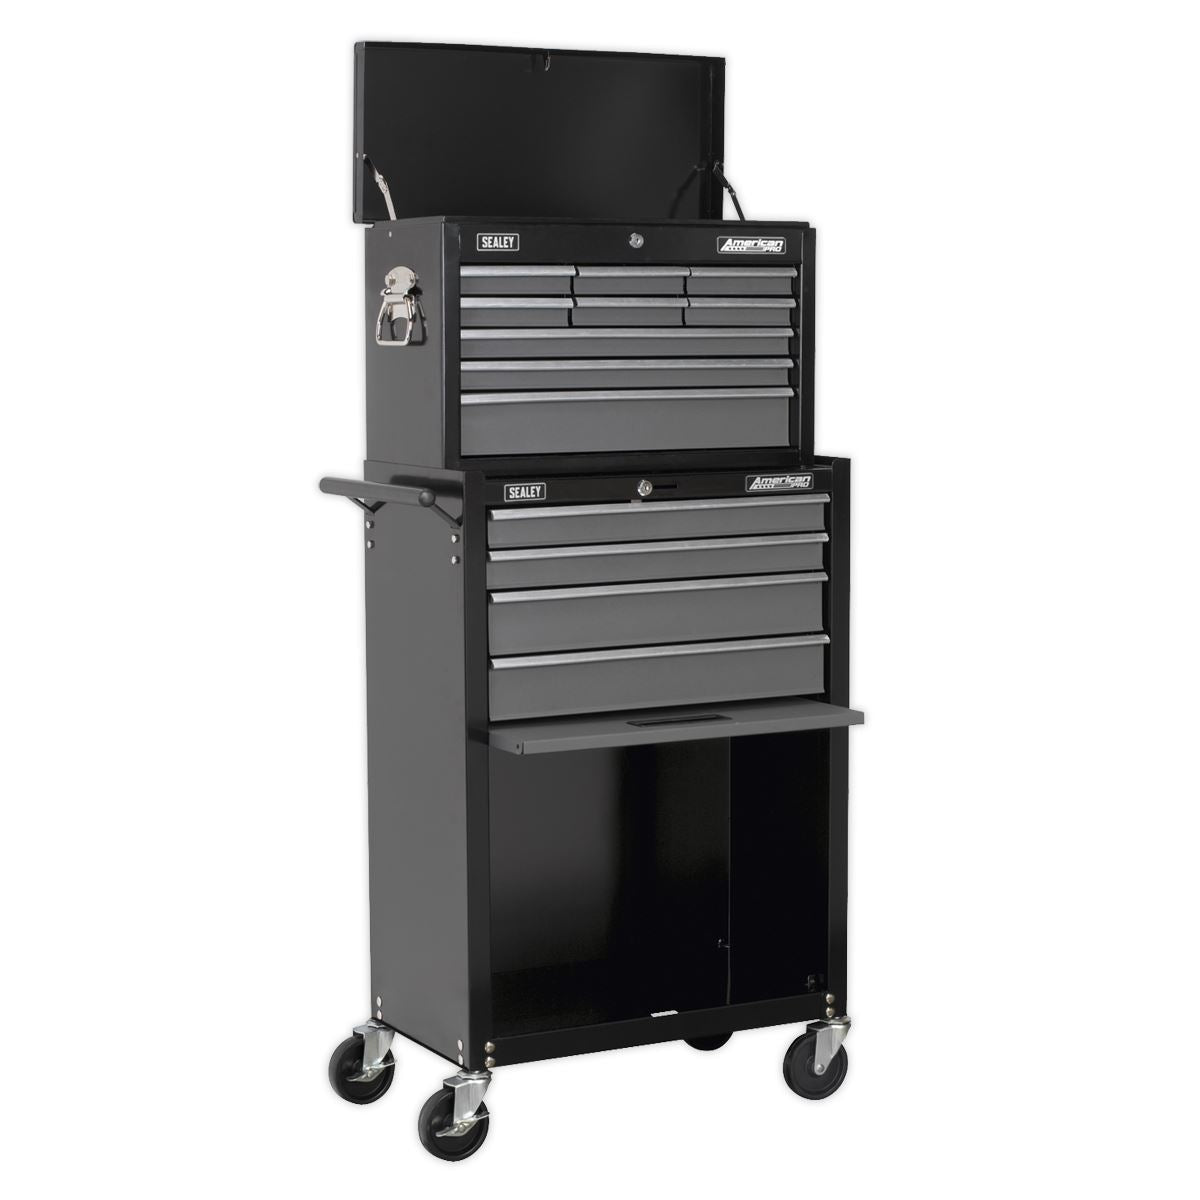 Sealey American Pro Topchest & Rollcab Combination 13 Drawer with Ball-Bearing Slides - Black/Grey